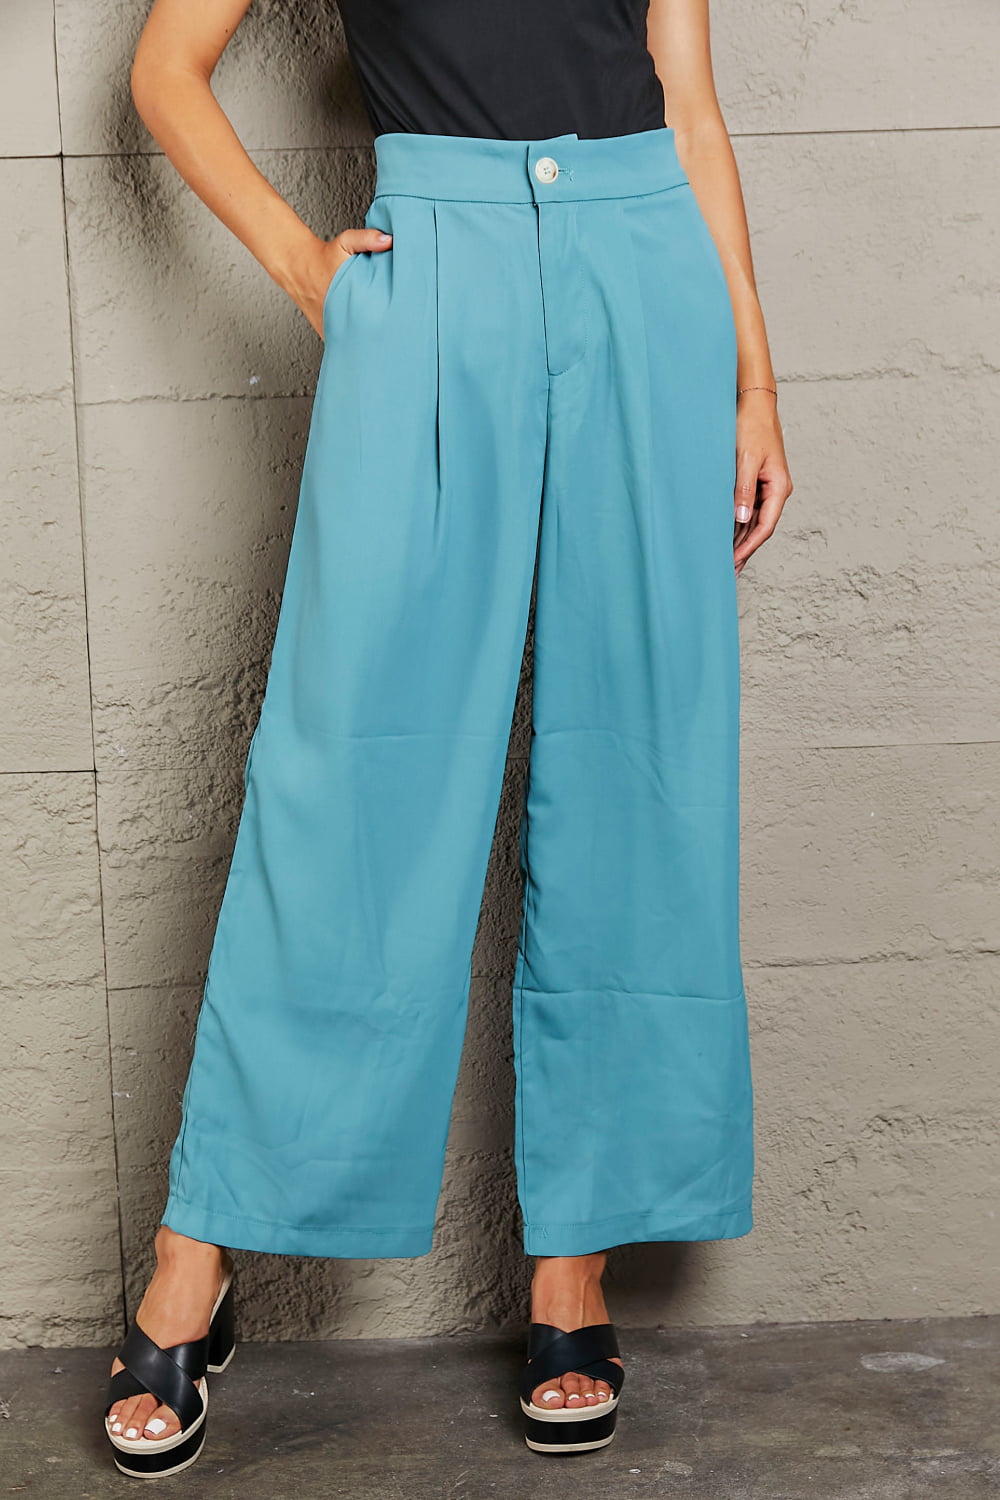 Light Slate Gray Wide Leg Buttoned Pants Sentient Beauty Fashions Apparel & Accessories